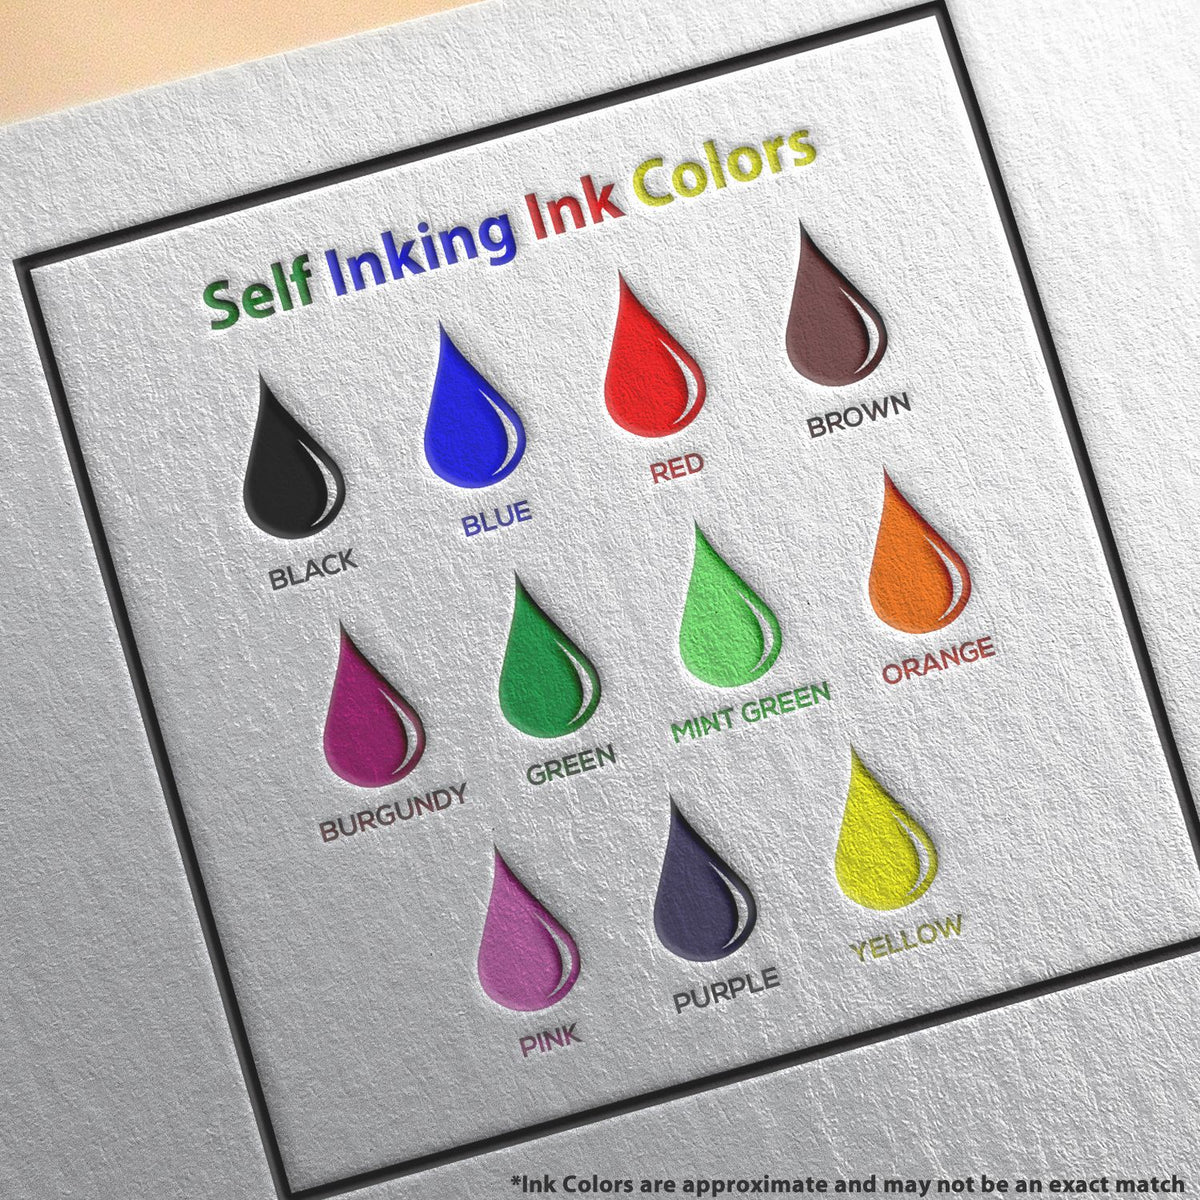 A picture showing the different ink colors or hues available for the Self-Inking Montana Landscape Architect Stamp product.